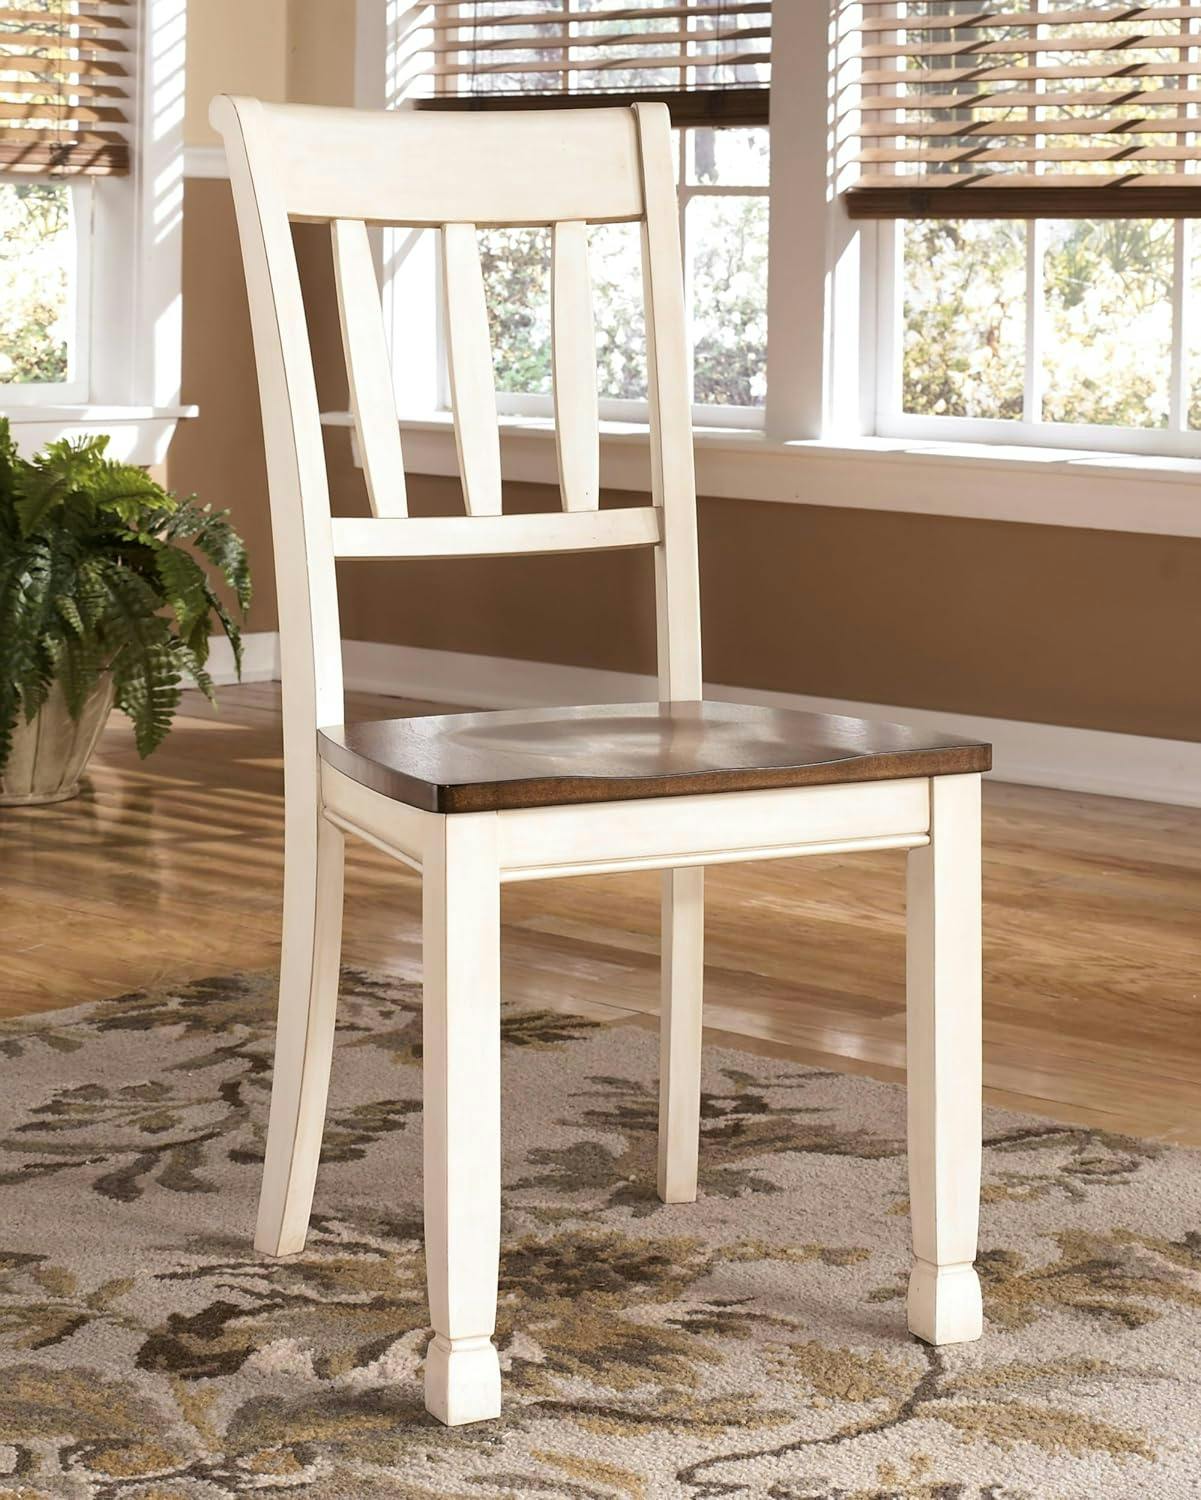 Cottage Charm Two-Tone Wooden Side Chair with Slat Back Design